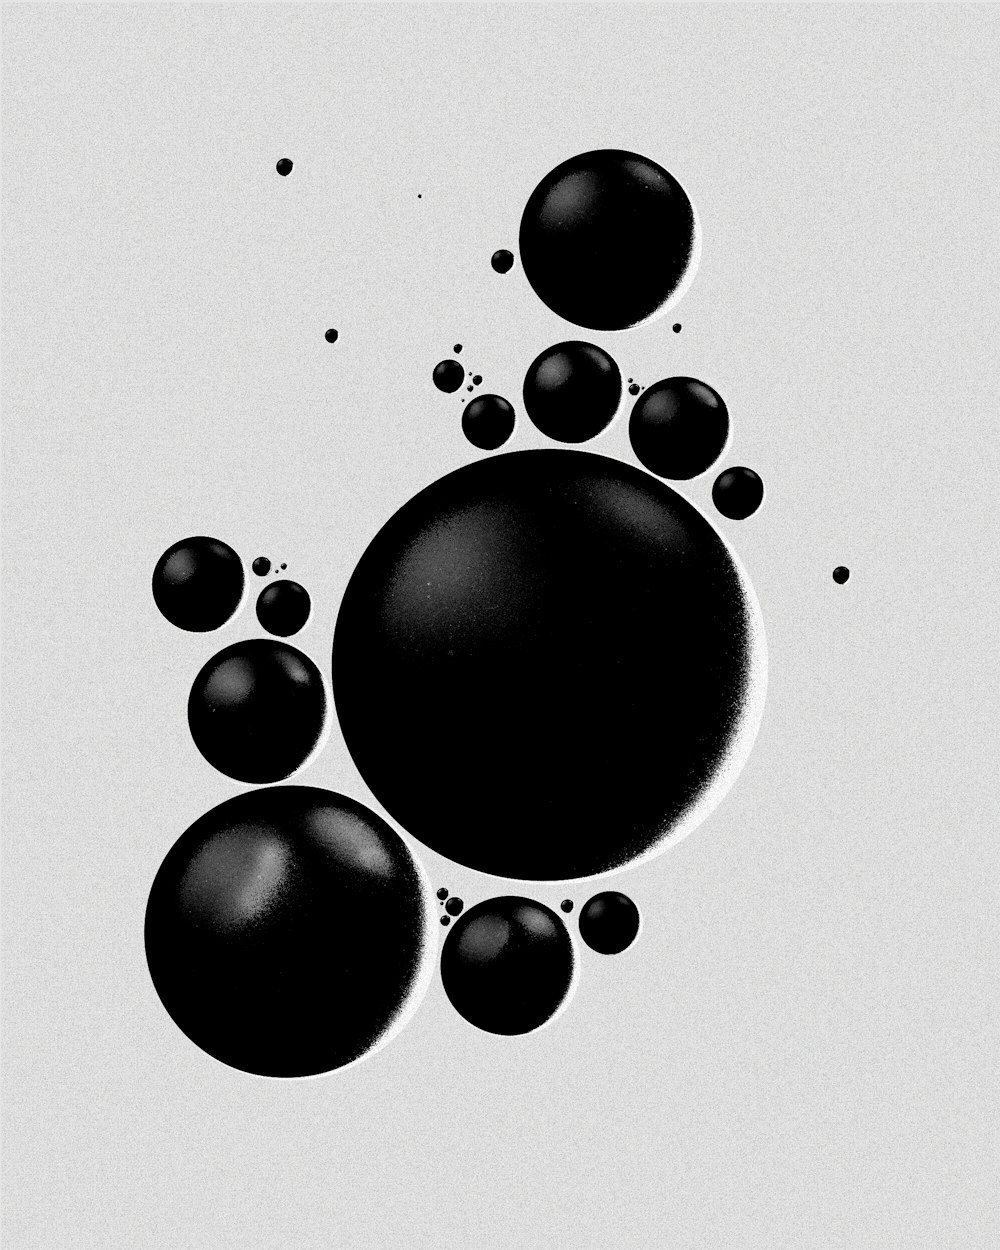 a group of black spheres